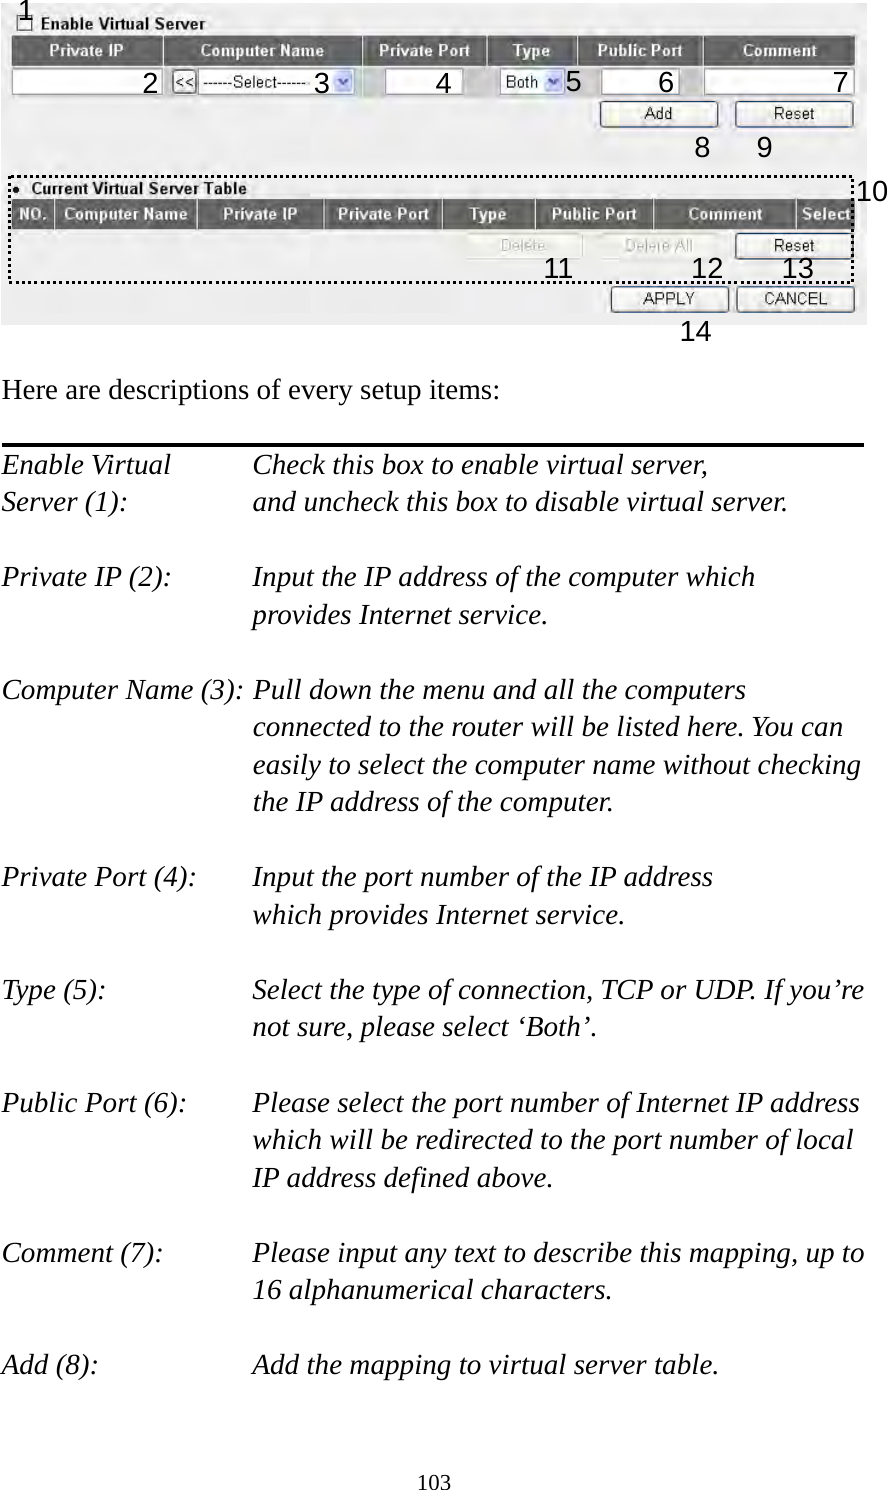 103   Here are descriptions of every setup items:  Enable Virtual      Check this box to enable virtual server, Server (1):       and uncheck this box to disable virtual server.  Private IP (2):      Input the IP address of the computer which      provides Internet service.  Computer Name (3): Pull down the menu and all the computers connected to the router will be listed here. You can easily to select the computer name without checking the IP address of the computer.  Private Port (4):    Input the port number of the IP address      which provides Internet service.  Type (5):    Select the type of connection, TCP or UDP. If you’re not sure, please select ‘Both’.  Public Port (6):    Please select the port number of Internet IP address which will be redirected to the port number of local IP address defined above.  Comment (7):    Please input any text to describe this mapping, up to 16 alphanumerical characters.  Add (8):        Add the mapping to virtual server table.  1 2 3 4 5 8 9 10 11 12 13 14 7 6 